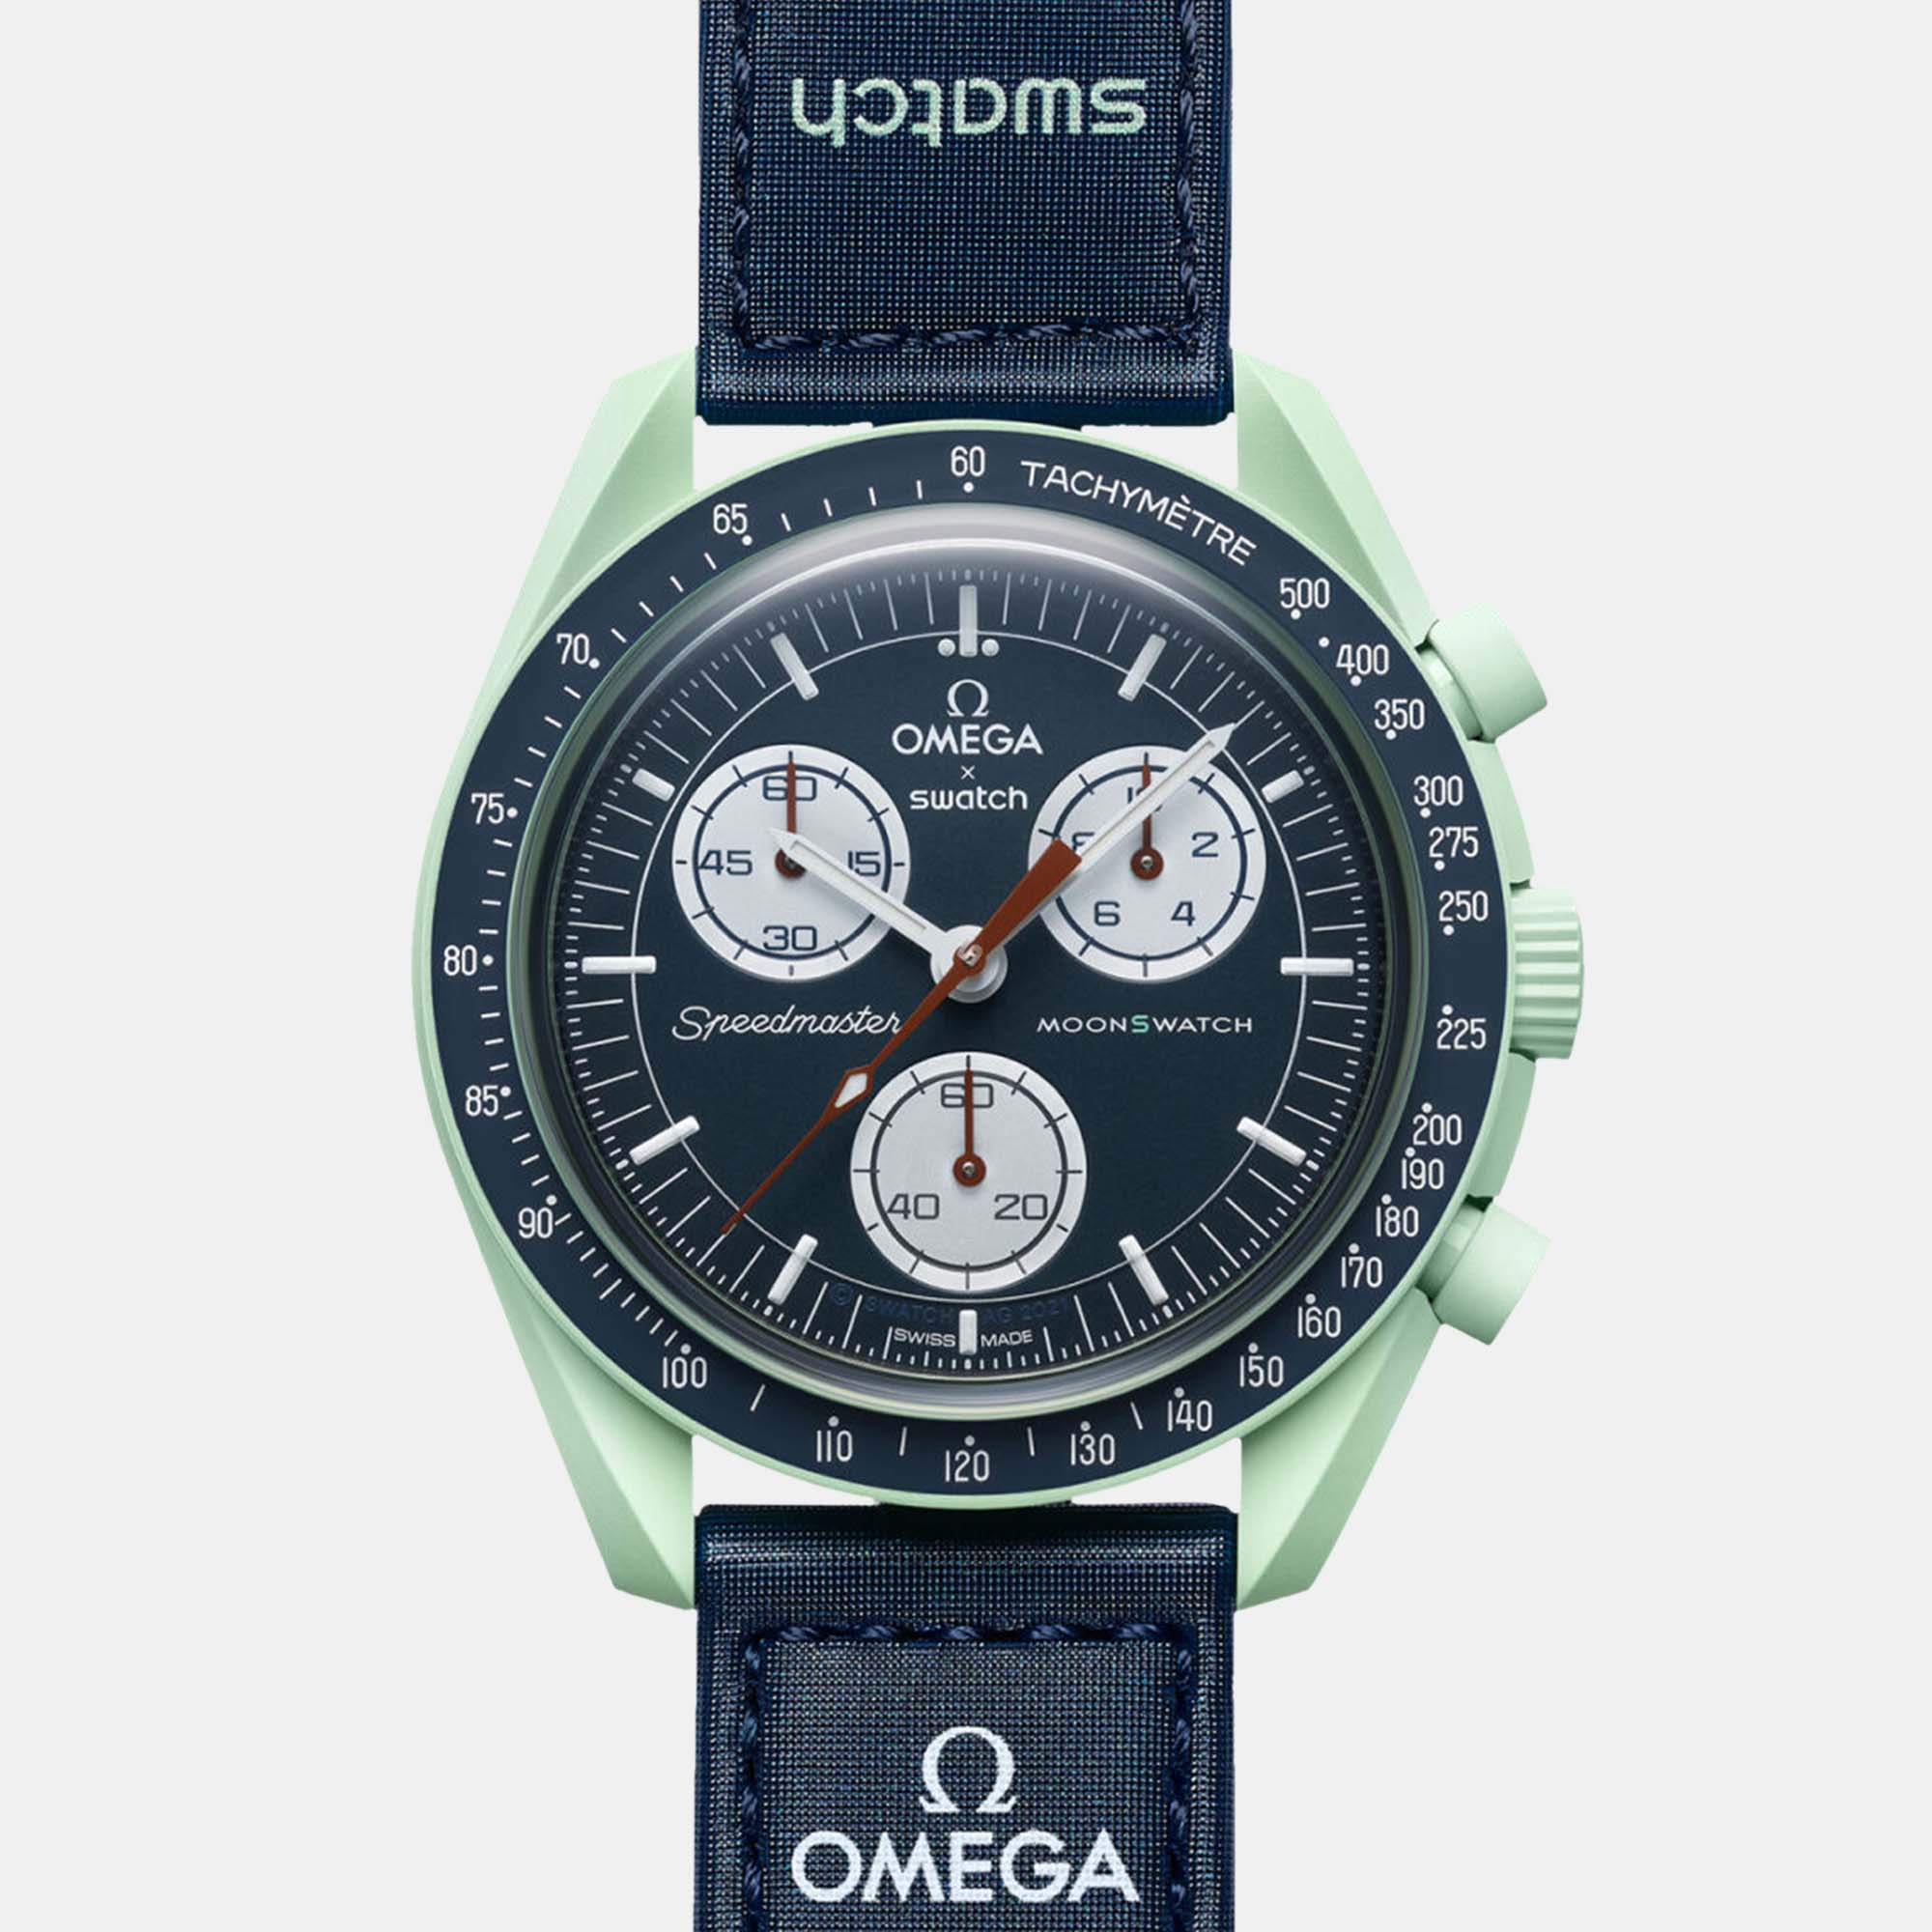 Omega green and blue velcro omega mission on earth so33g100 42 mm